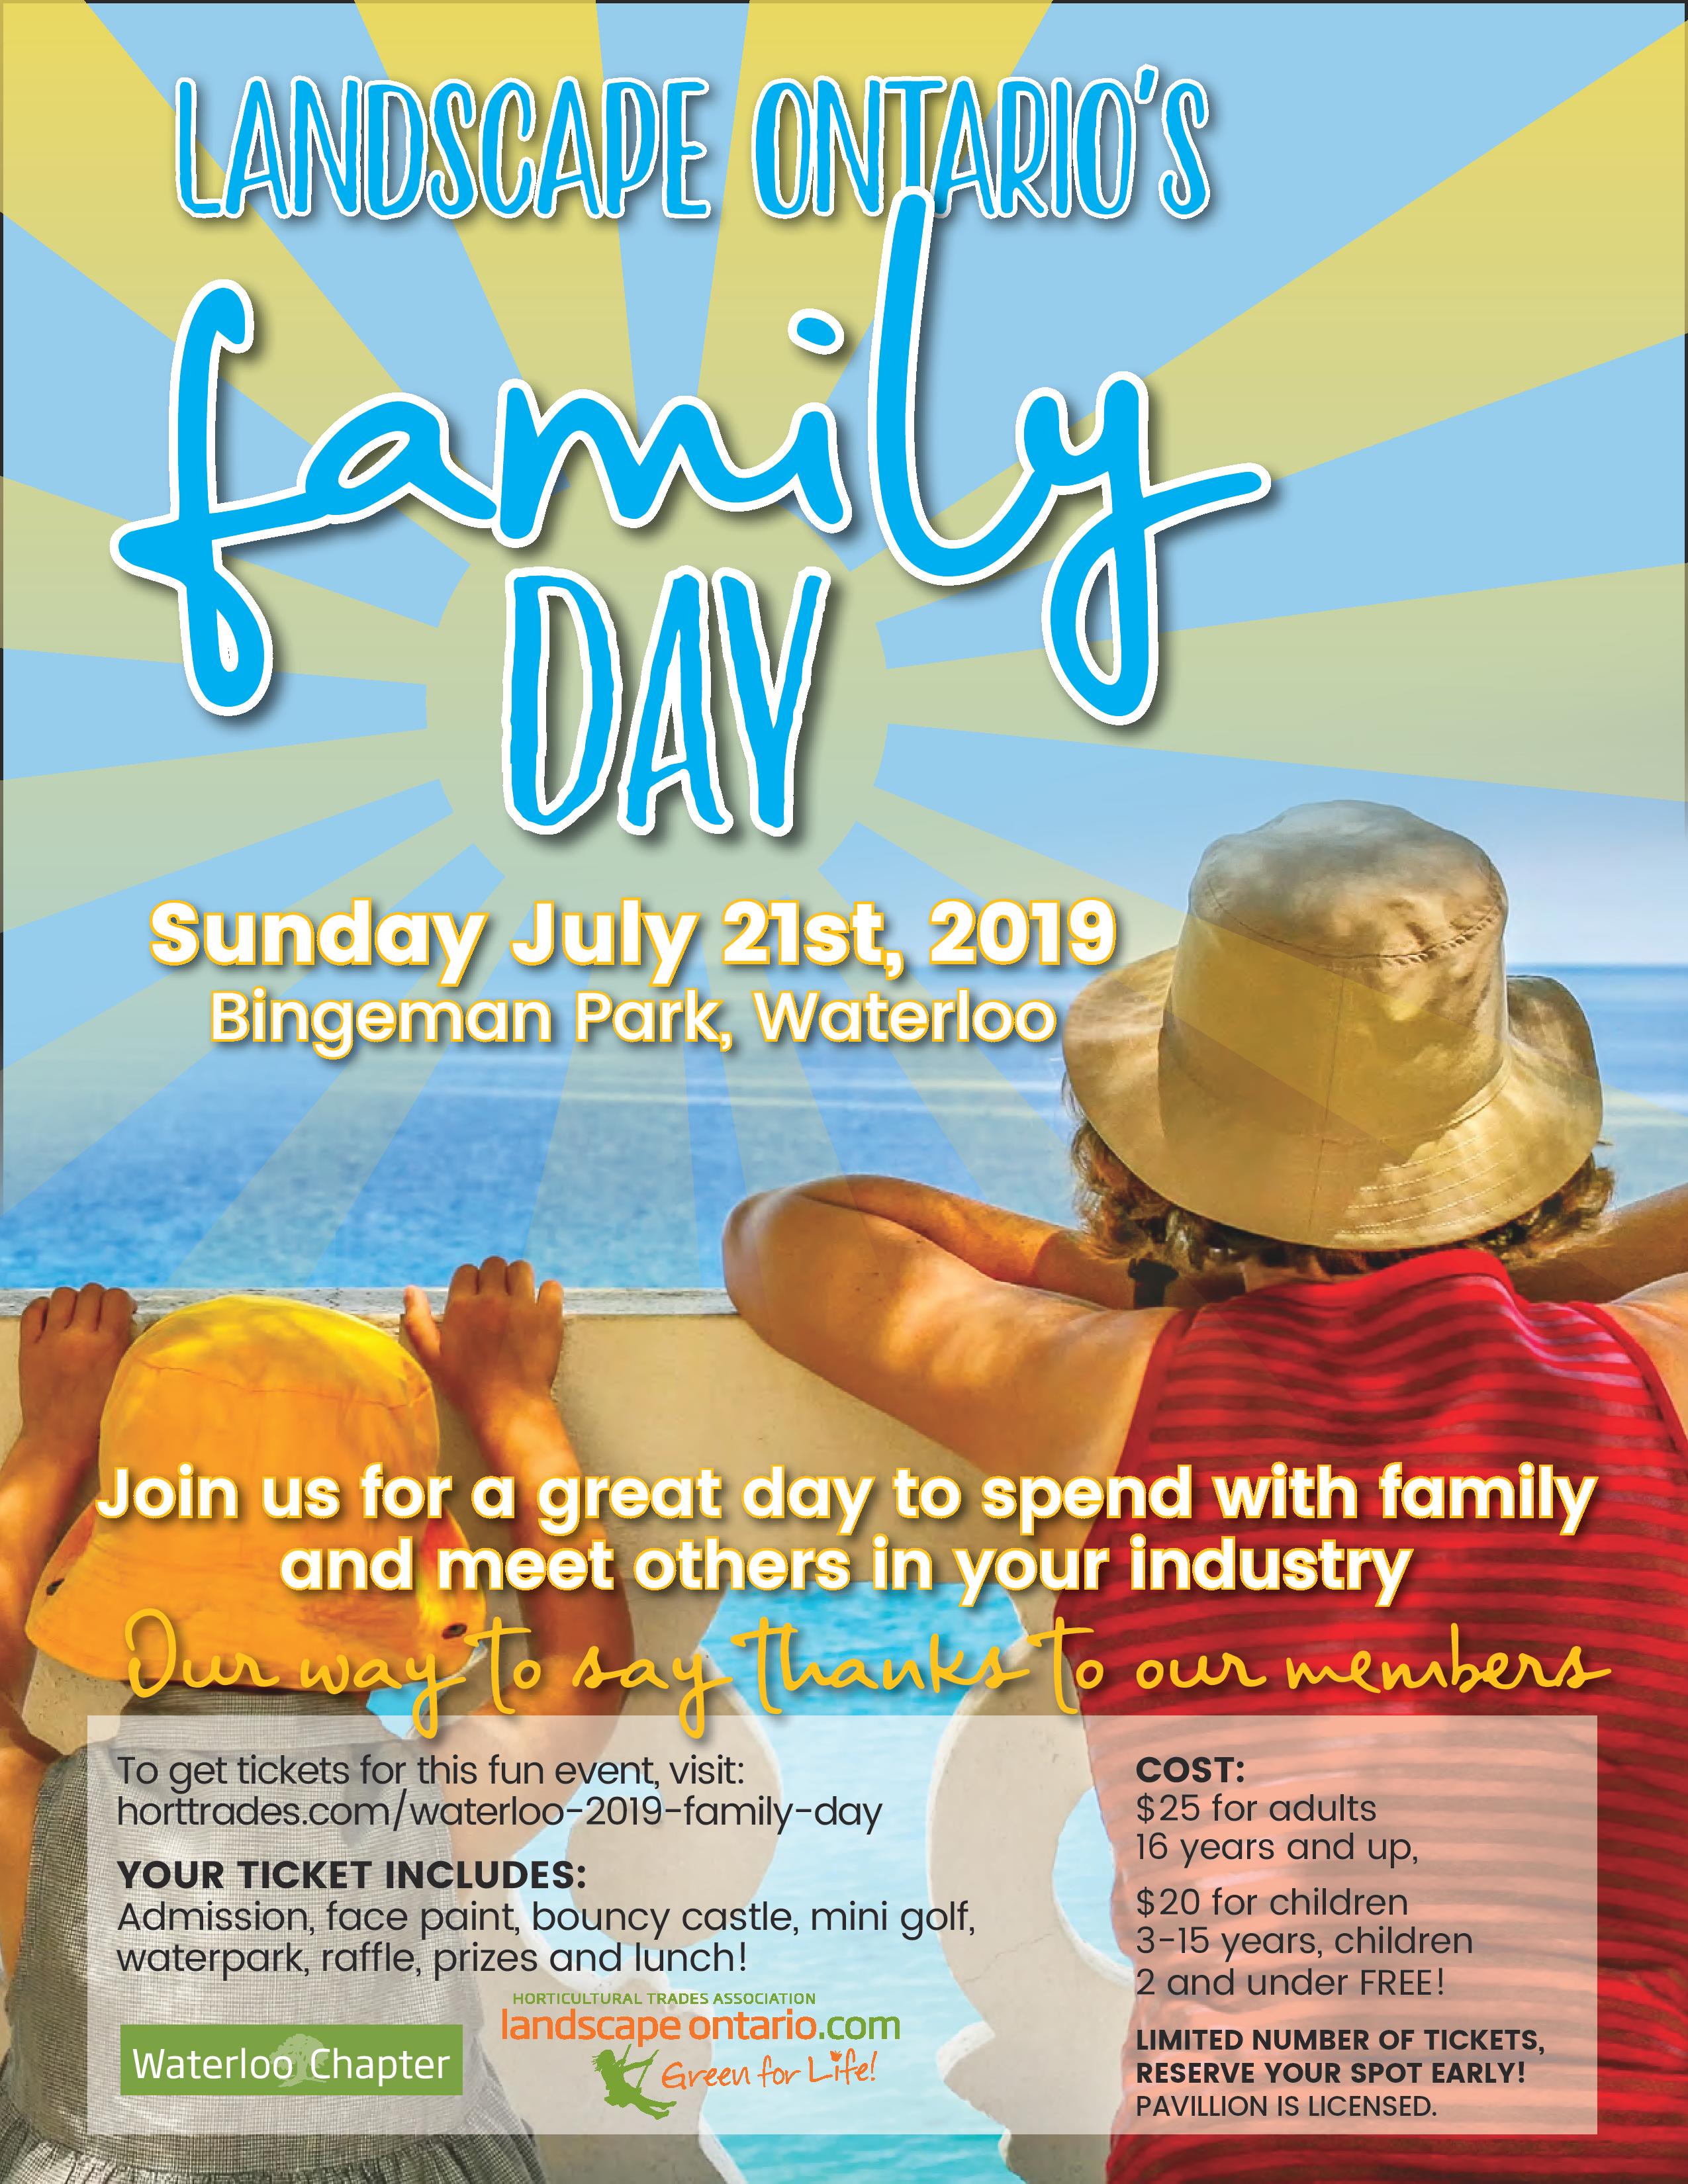 Waterloo Chapter Family Day 2019 Landscape Ontario